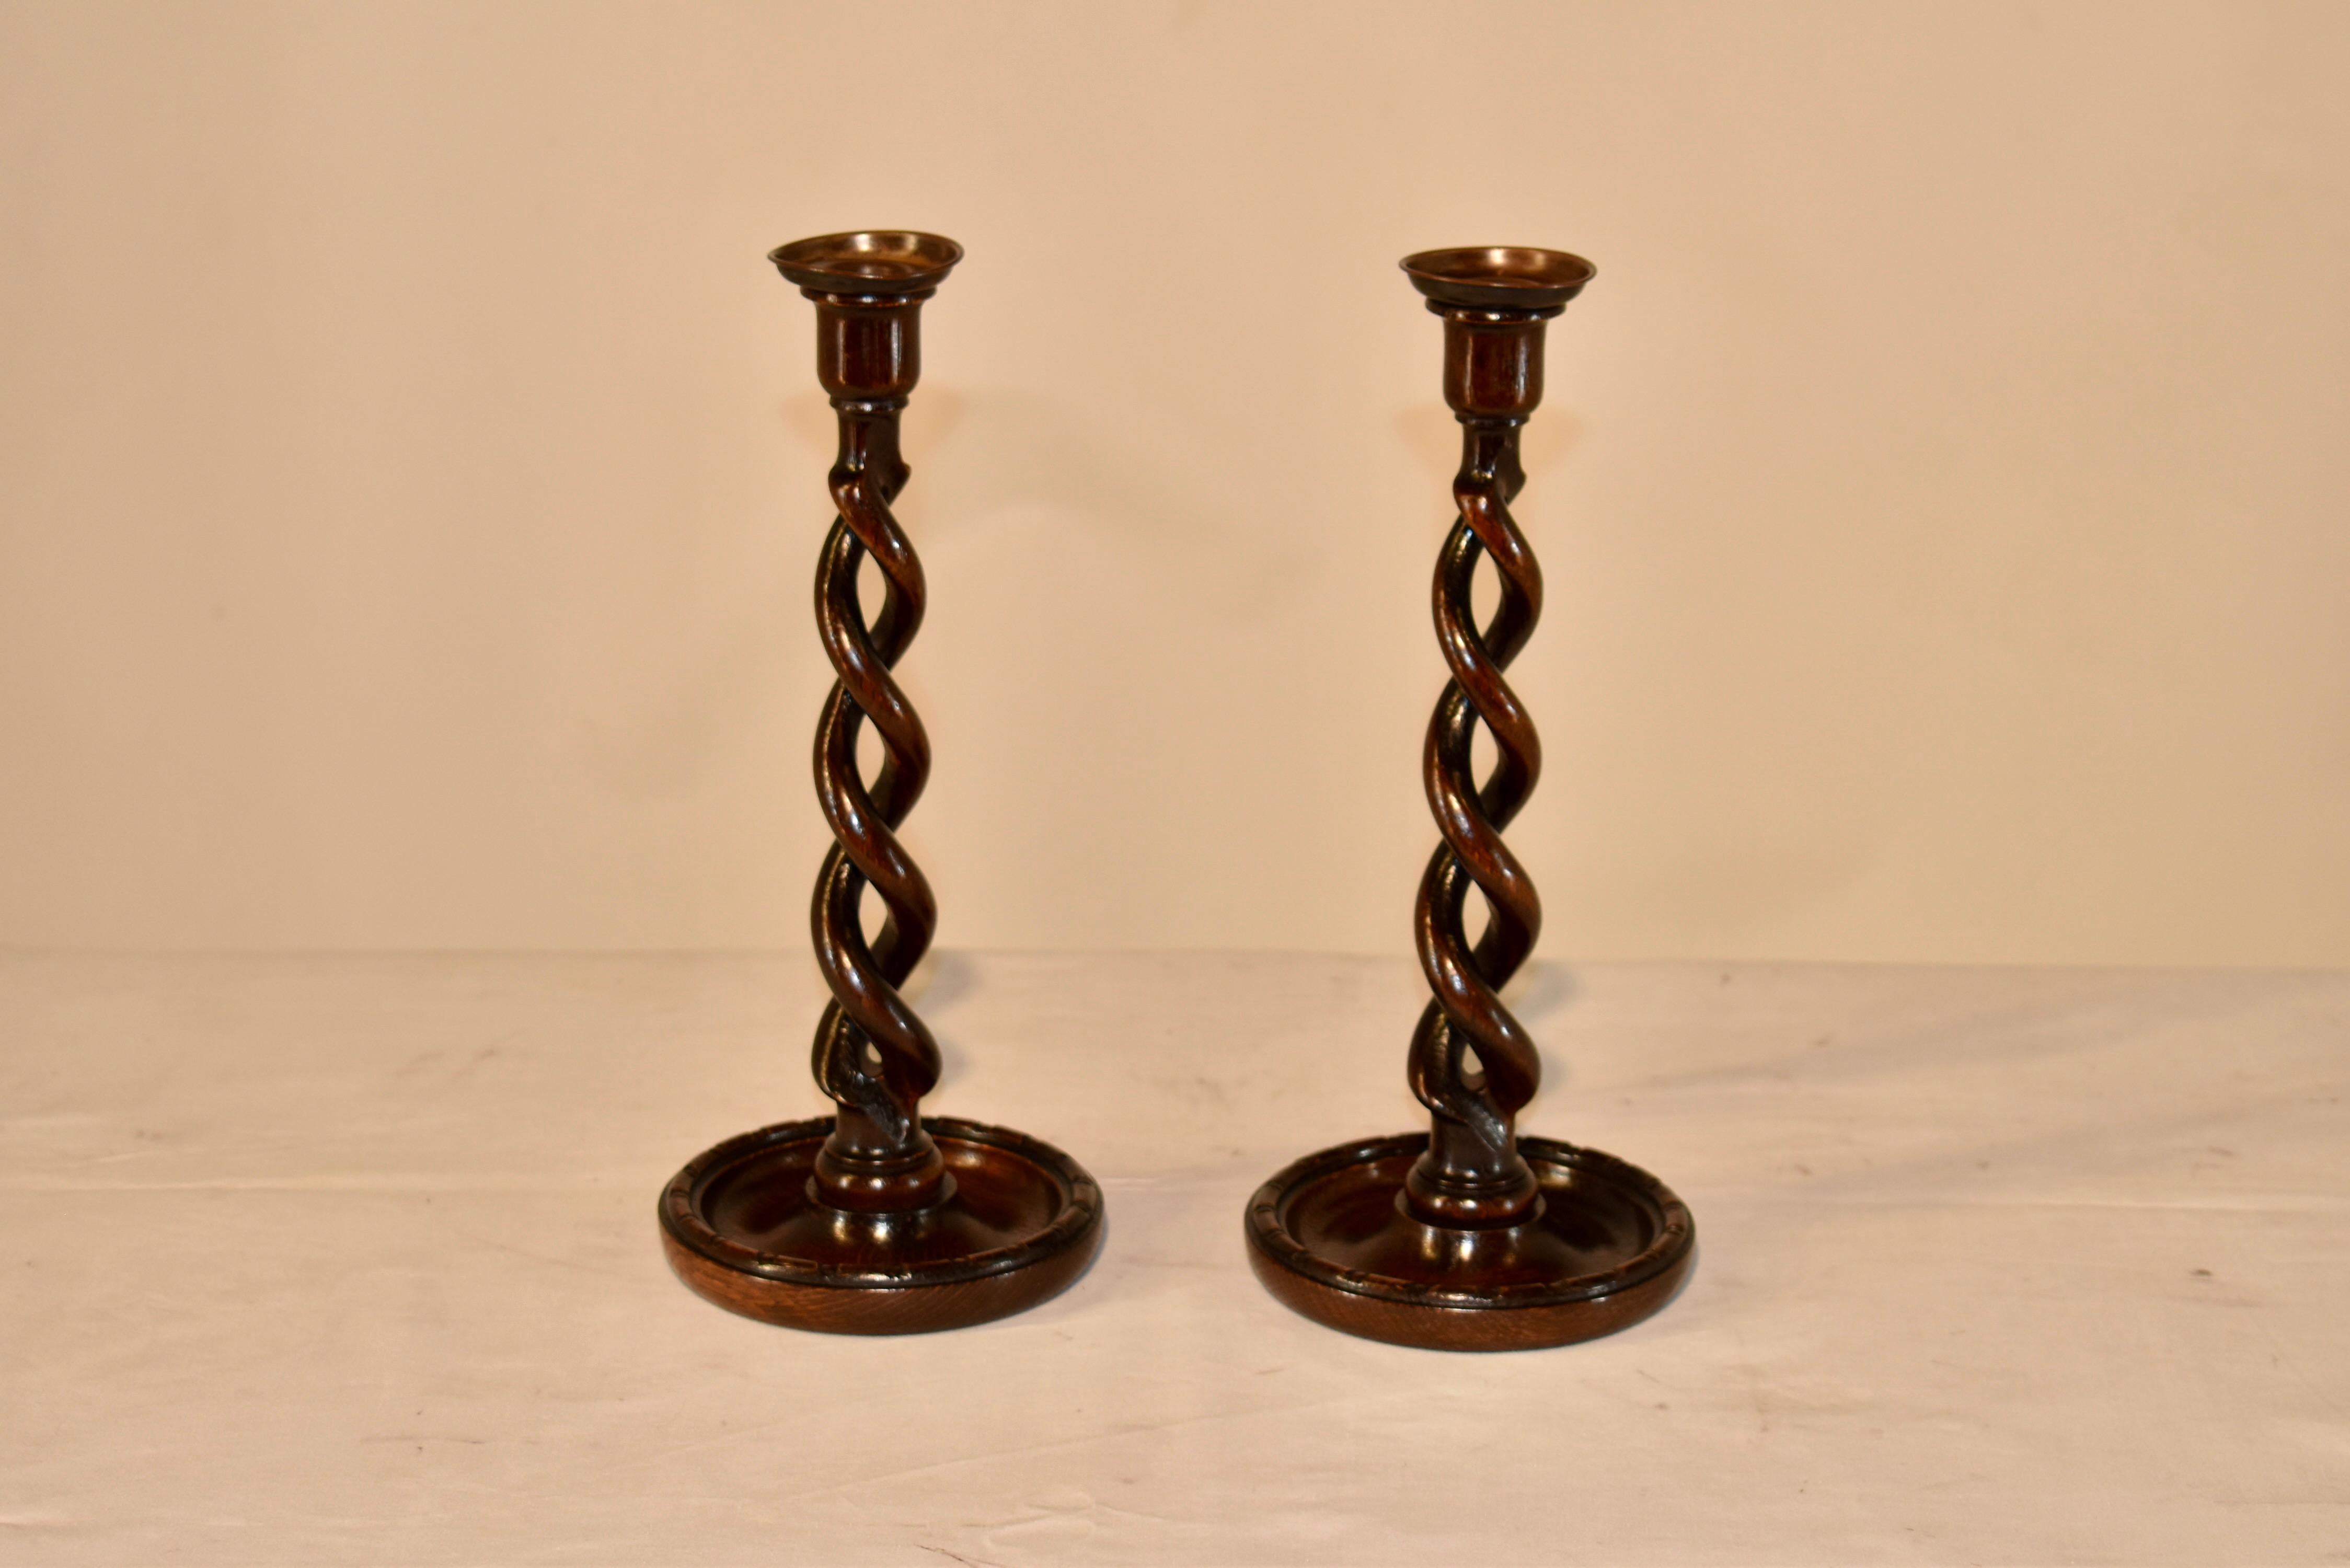 Pair of 19th century oak candlesticks from England with brass bobeches at the top, following down to turned candle cups over hand turned open barley twist stems. The candlesticks are supported on hand turned dish shaped bases with hand beading for